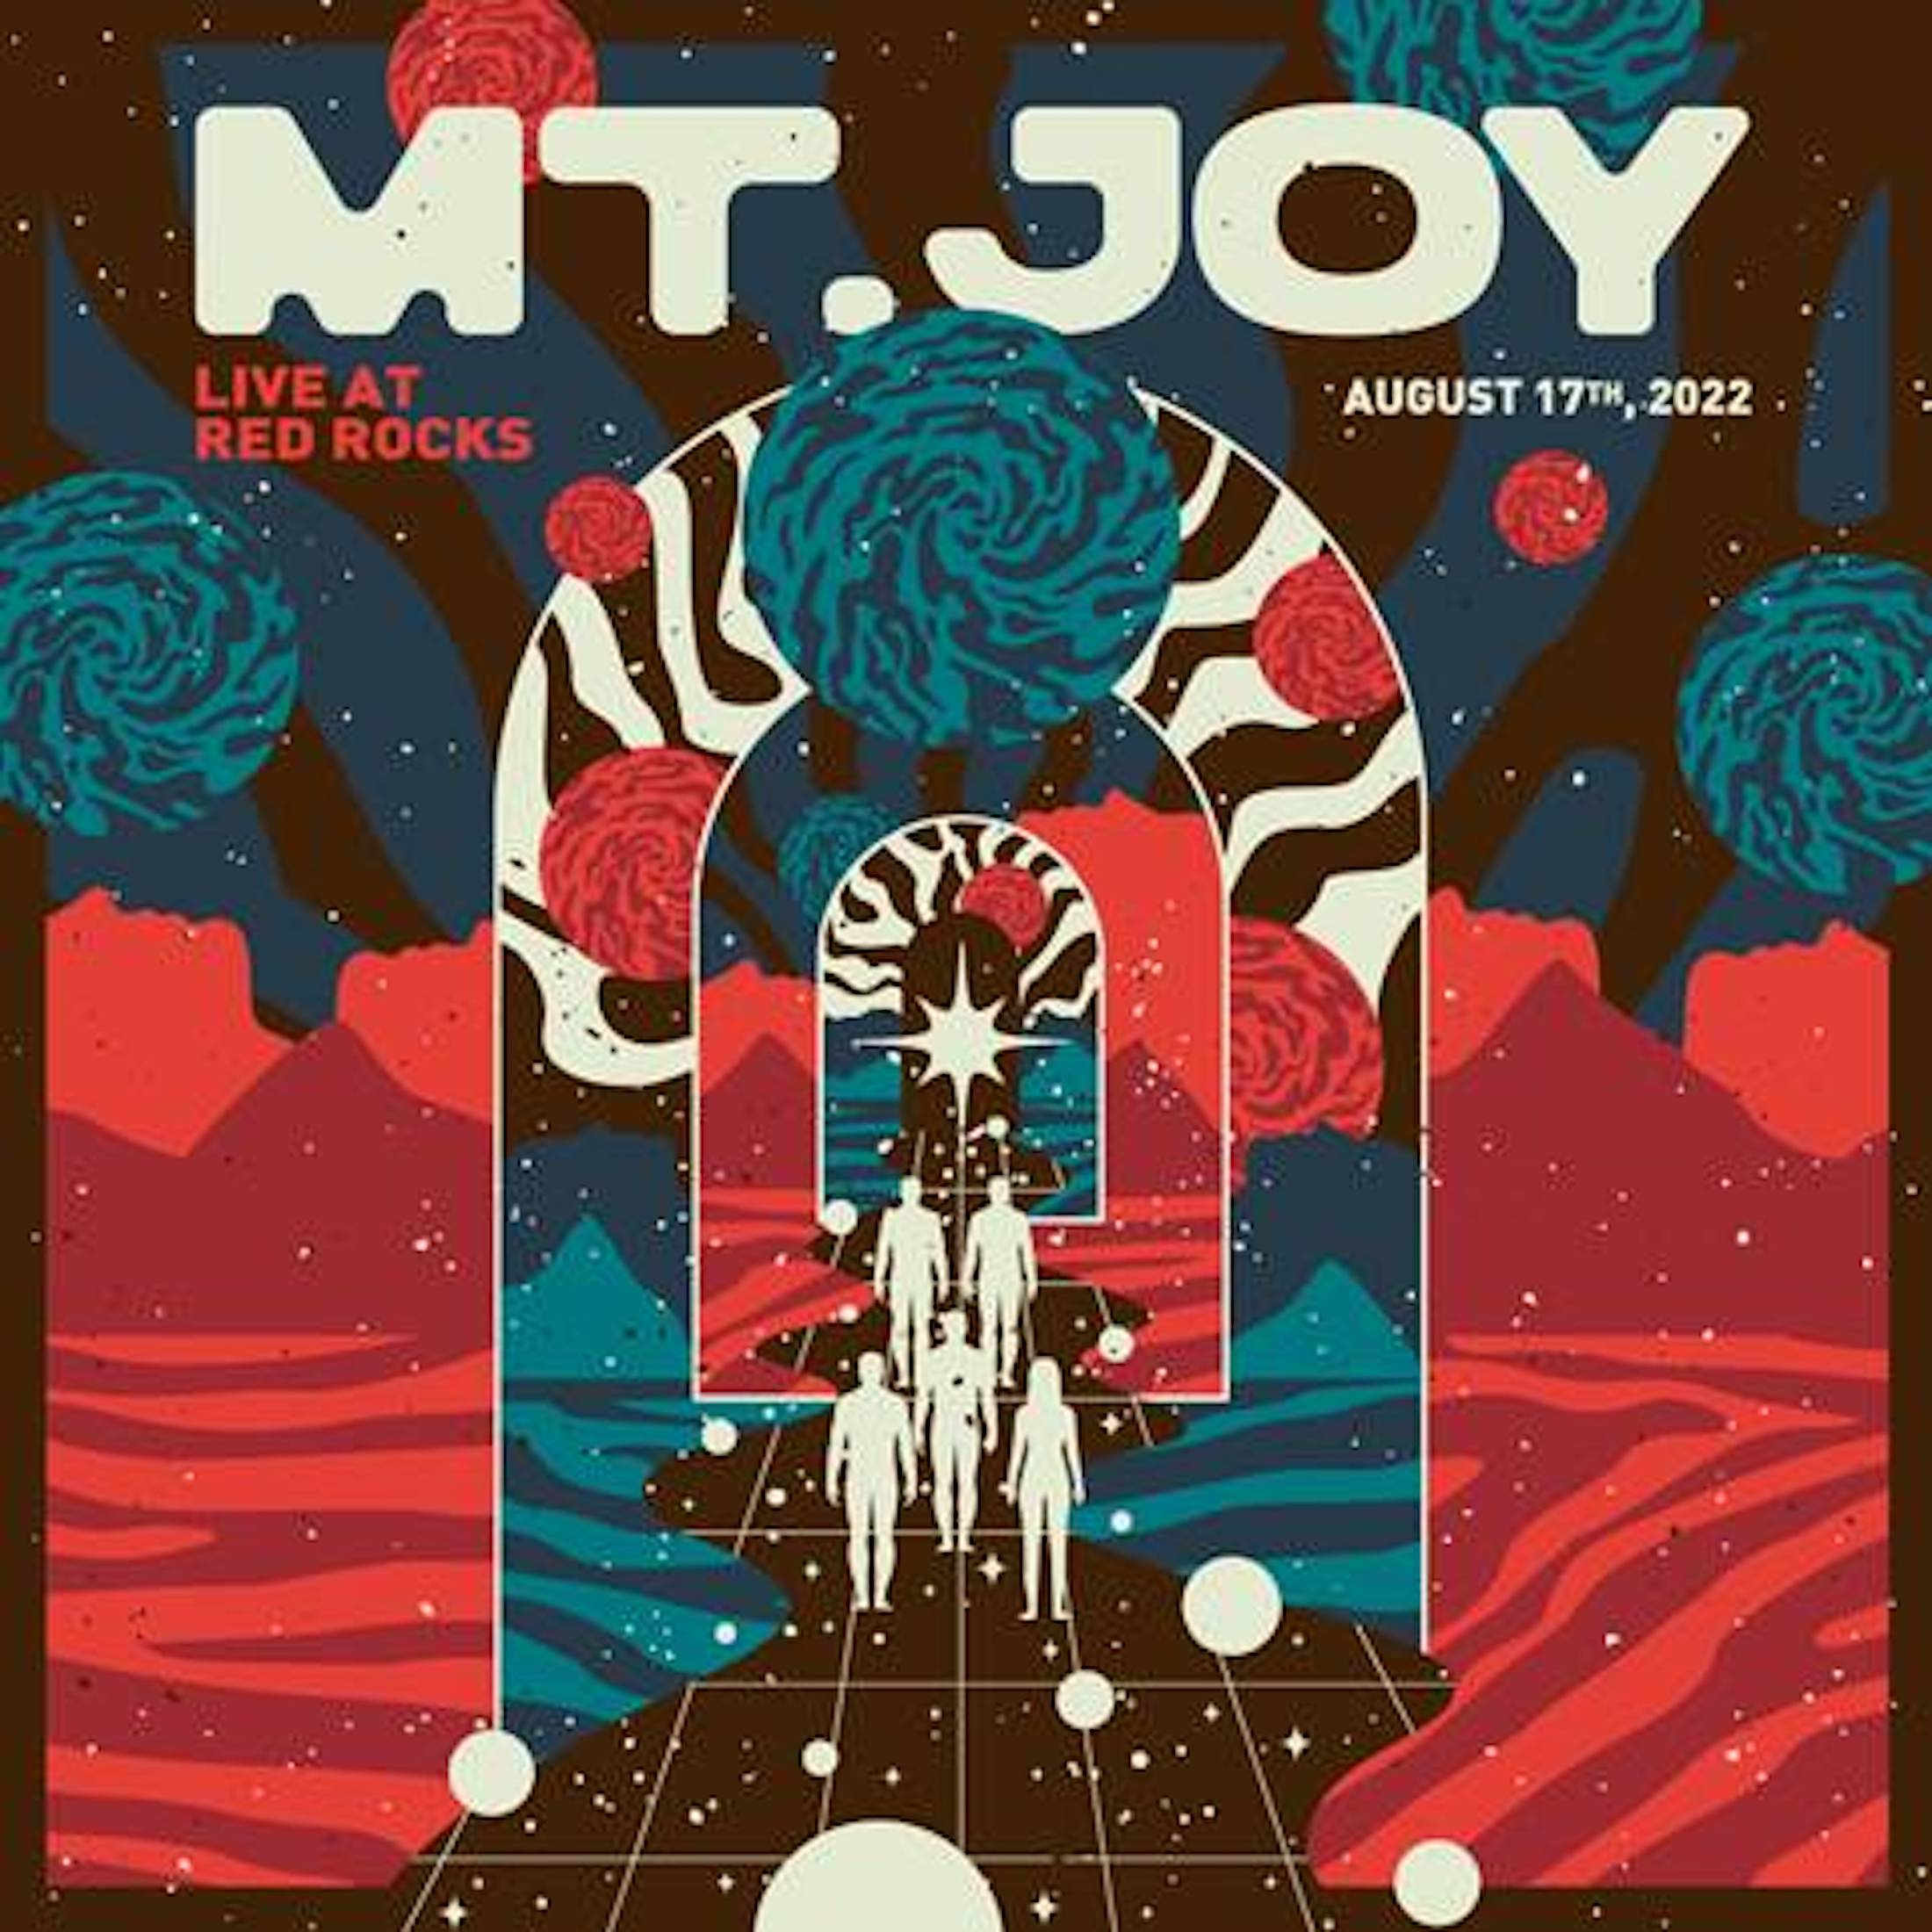 MT. JOY live at Red Rocks Amphitheatre on Wednesday, August 17, 2022